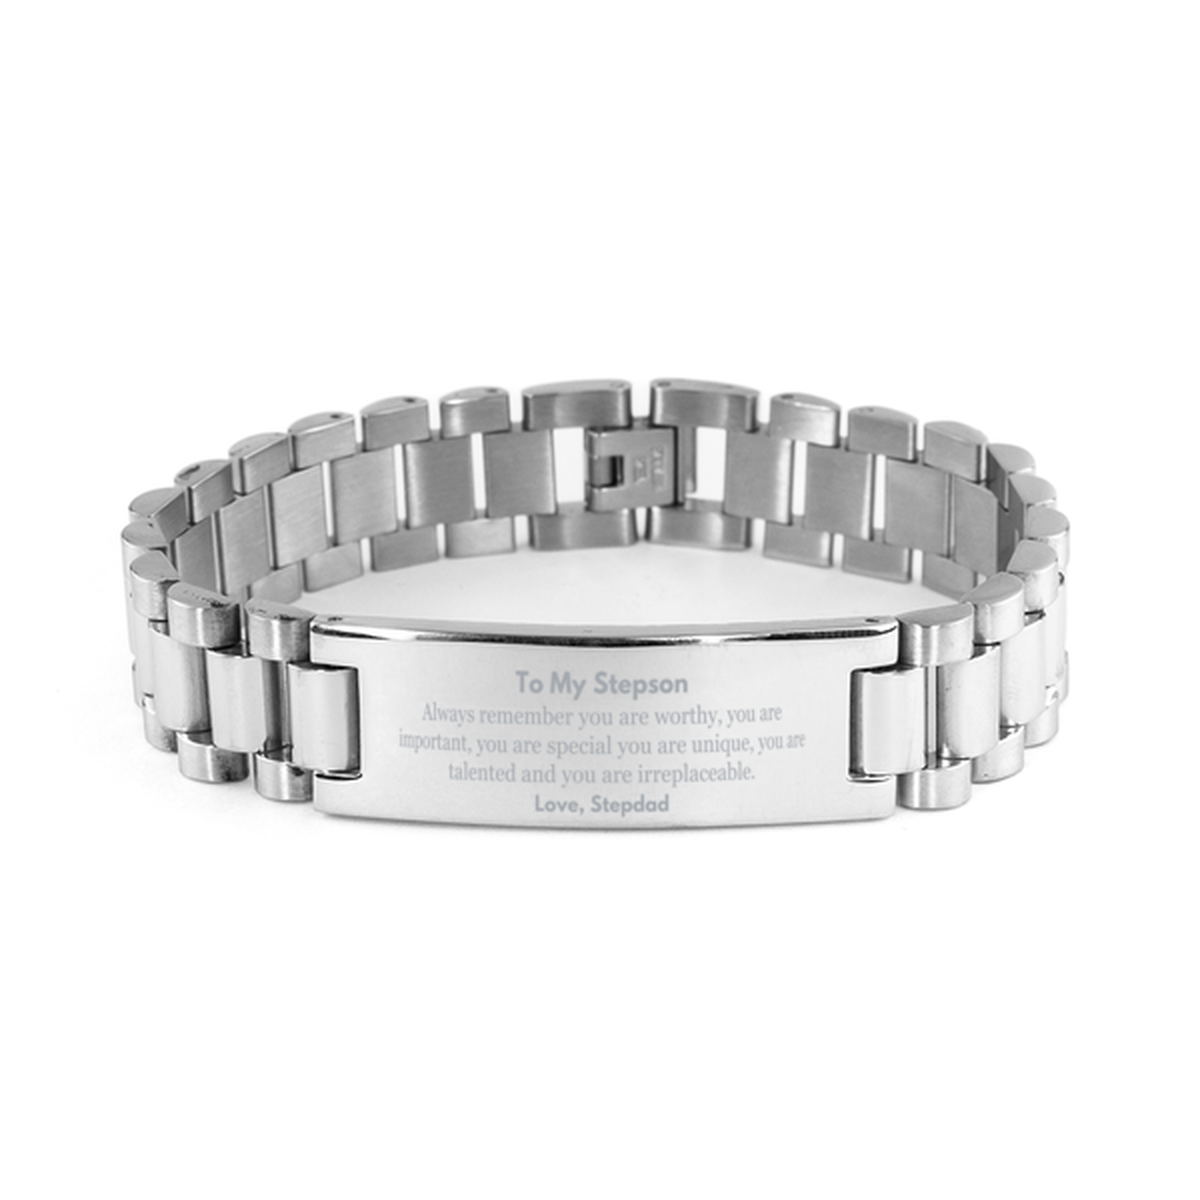 Stepson Birthday Gifts from Stepdad, Inspirational Ladder Stainless Steel Bracelet for Stepson Christmas Graduation Gifts for Stepson Always remember you are worthy, you are important. Love, Stepdad